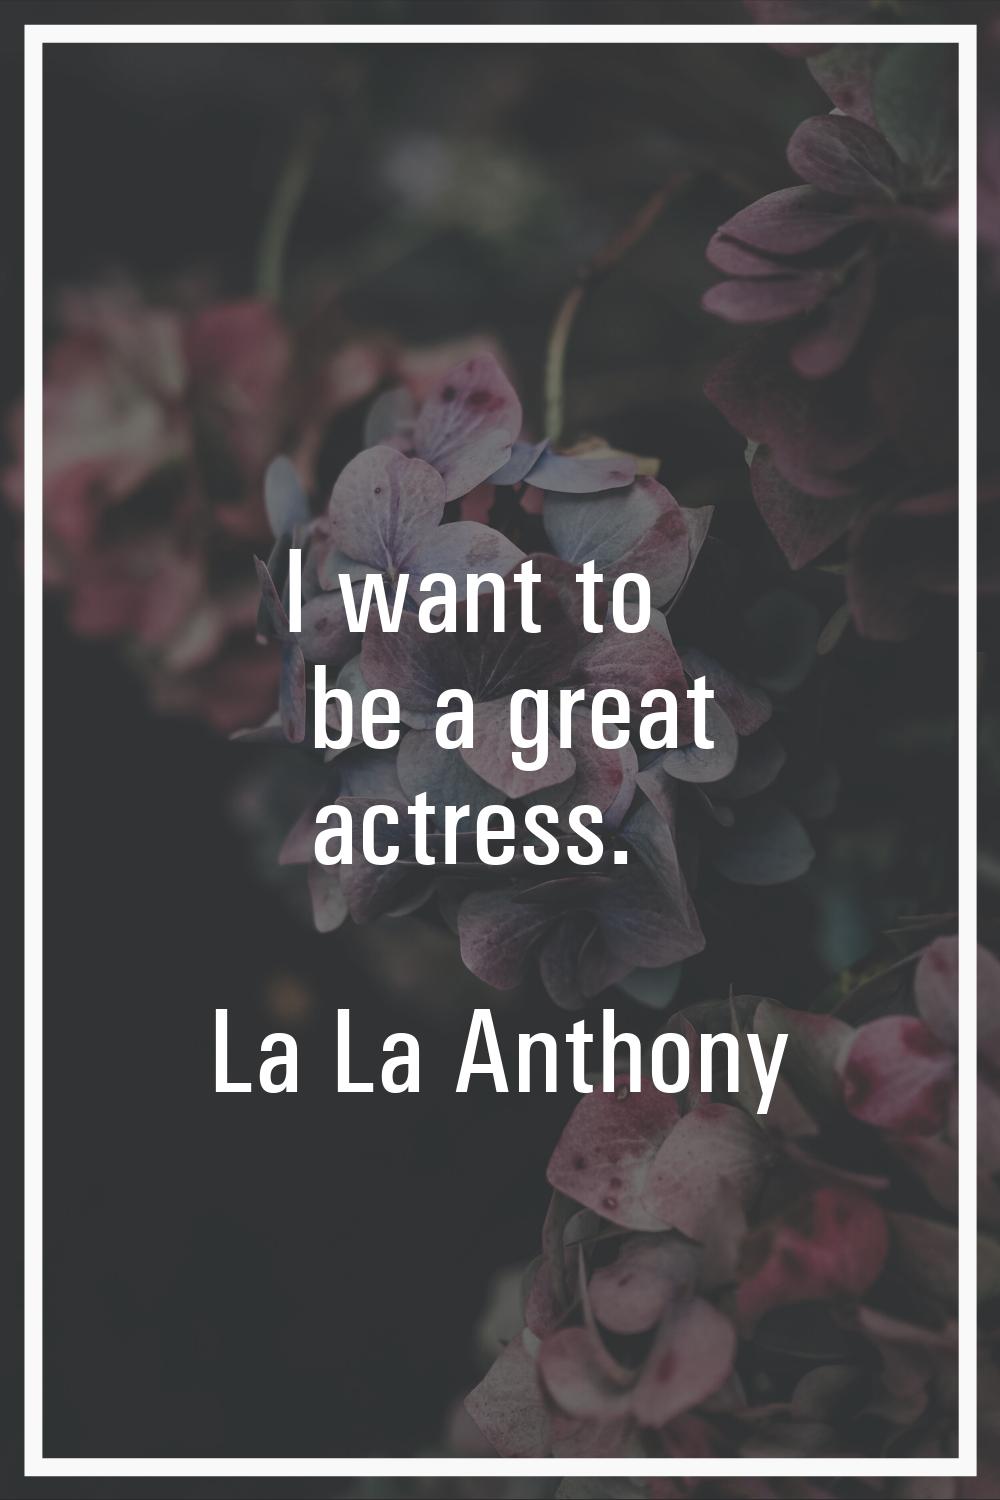 I want to be a great actress.